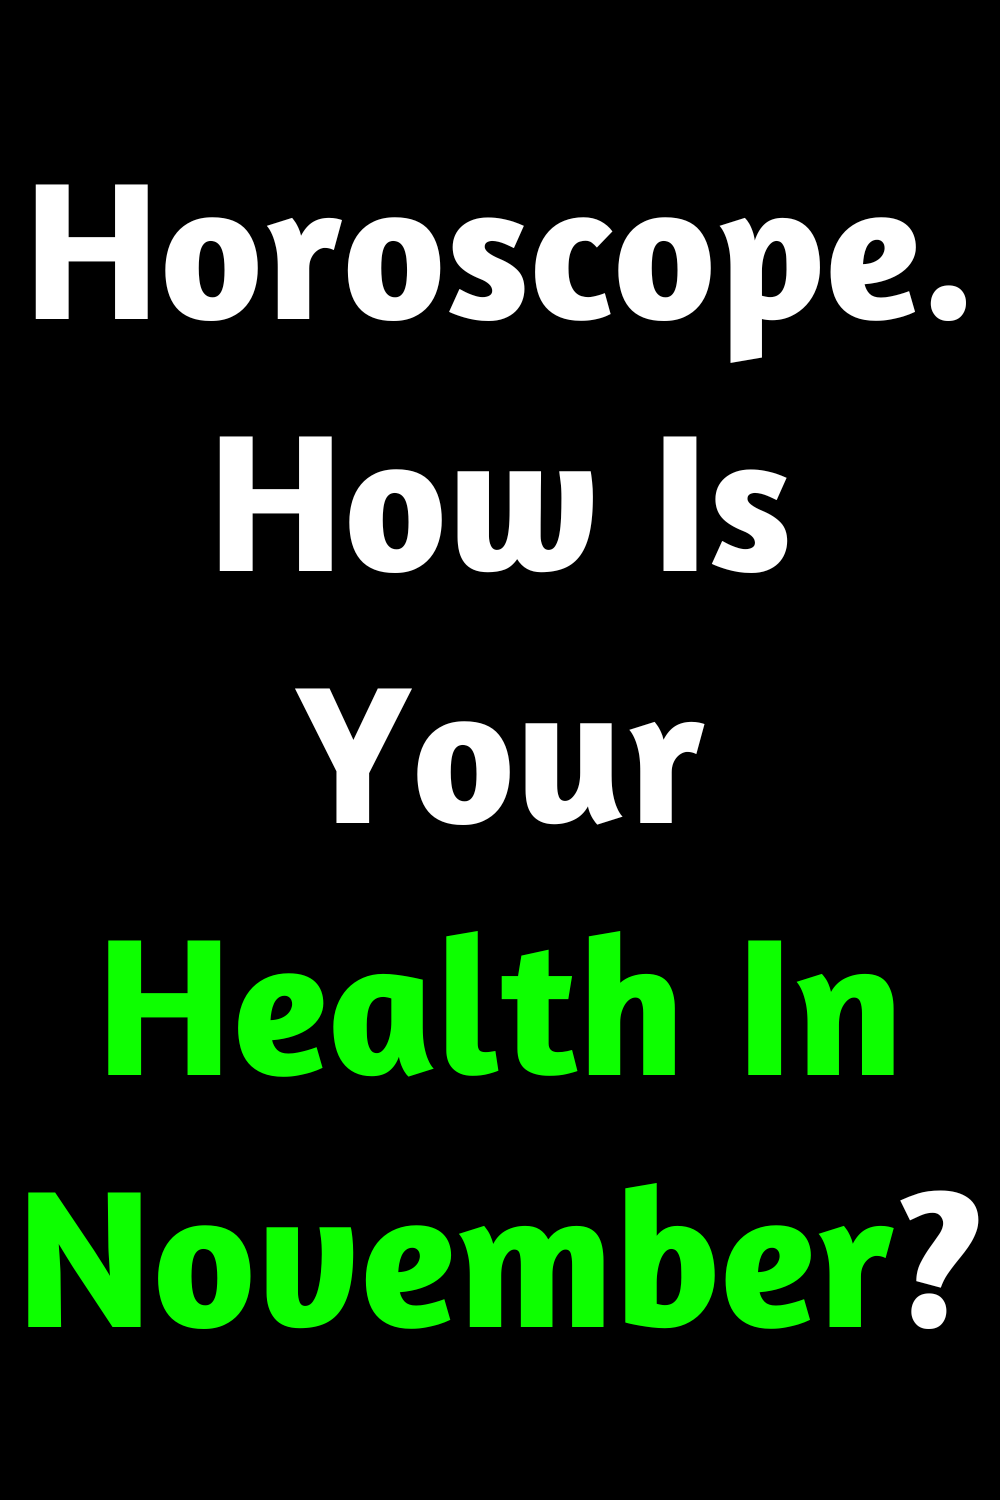 Horoscope. How Is Your Health In November?